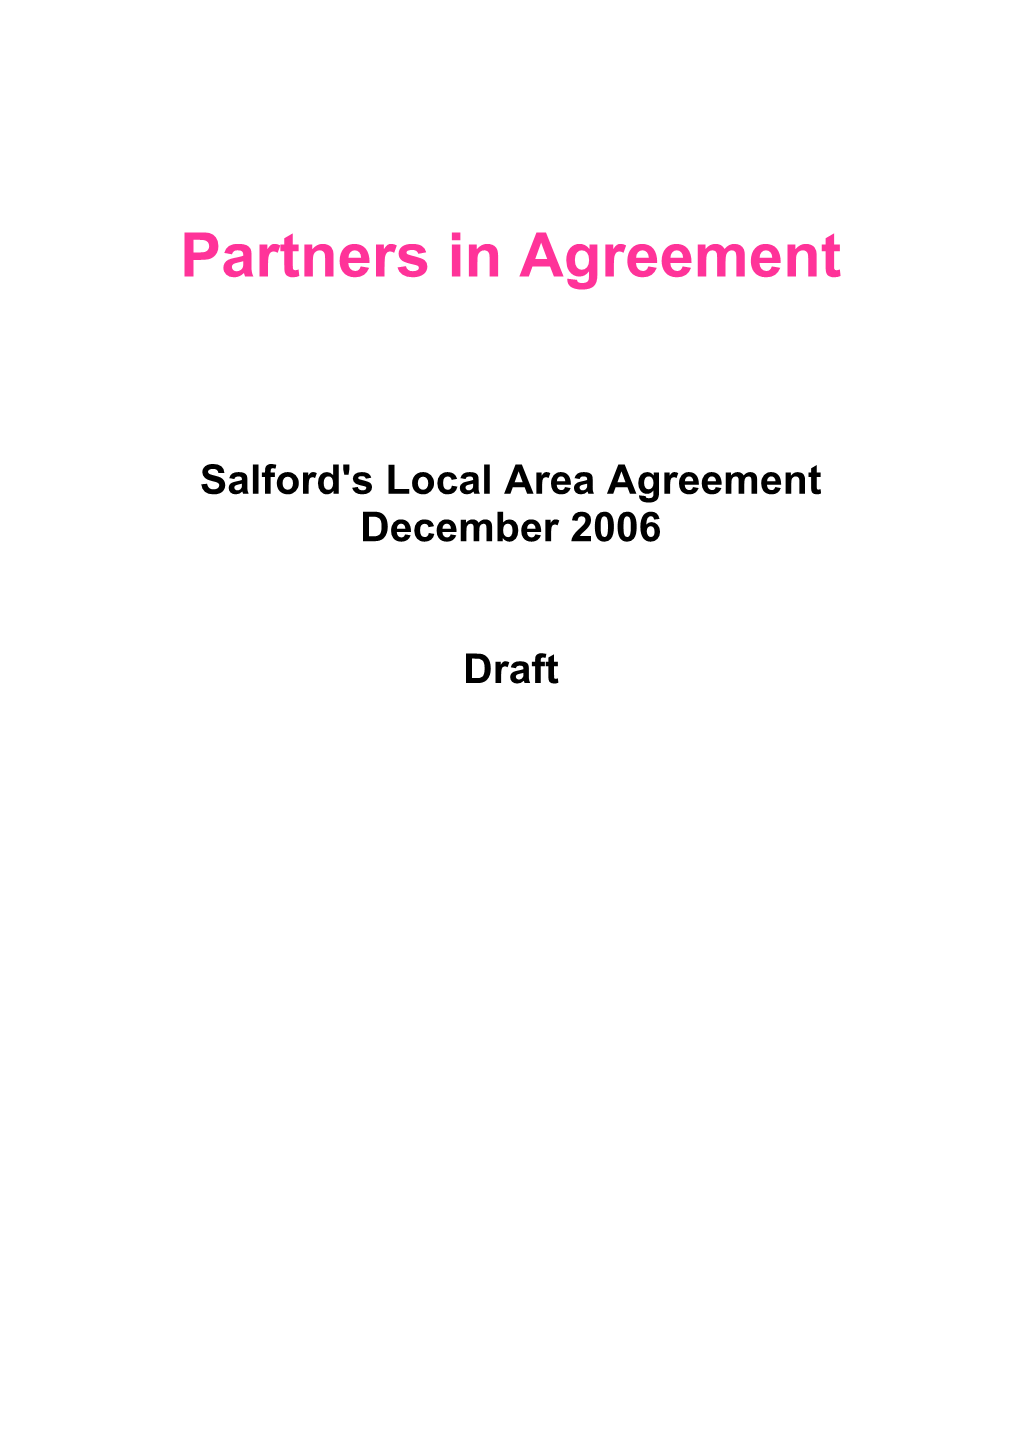 The Salford Agreement